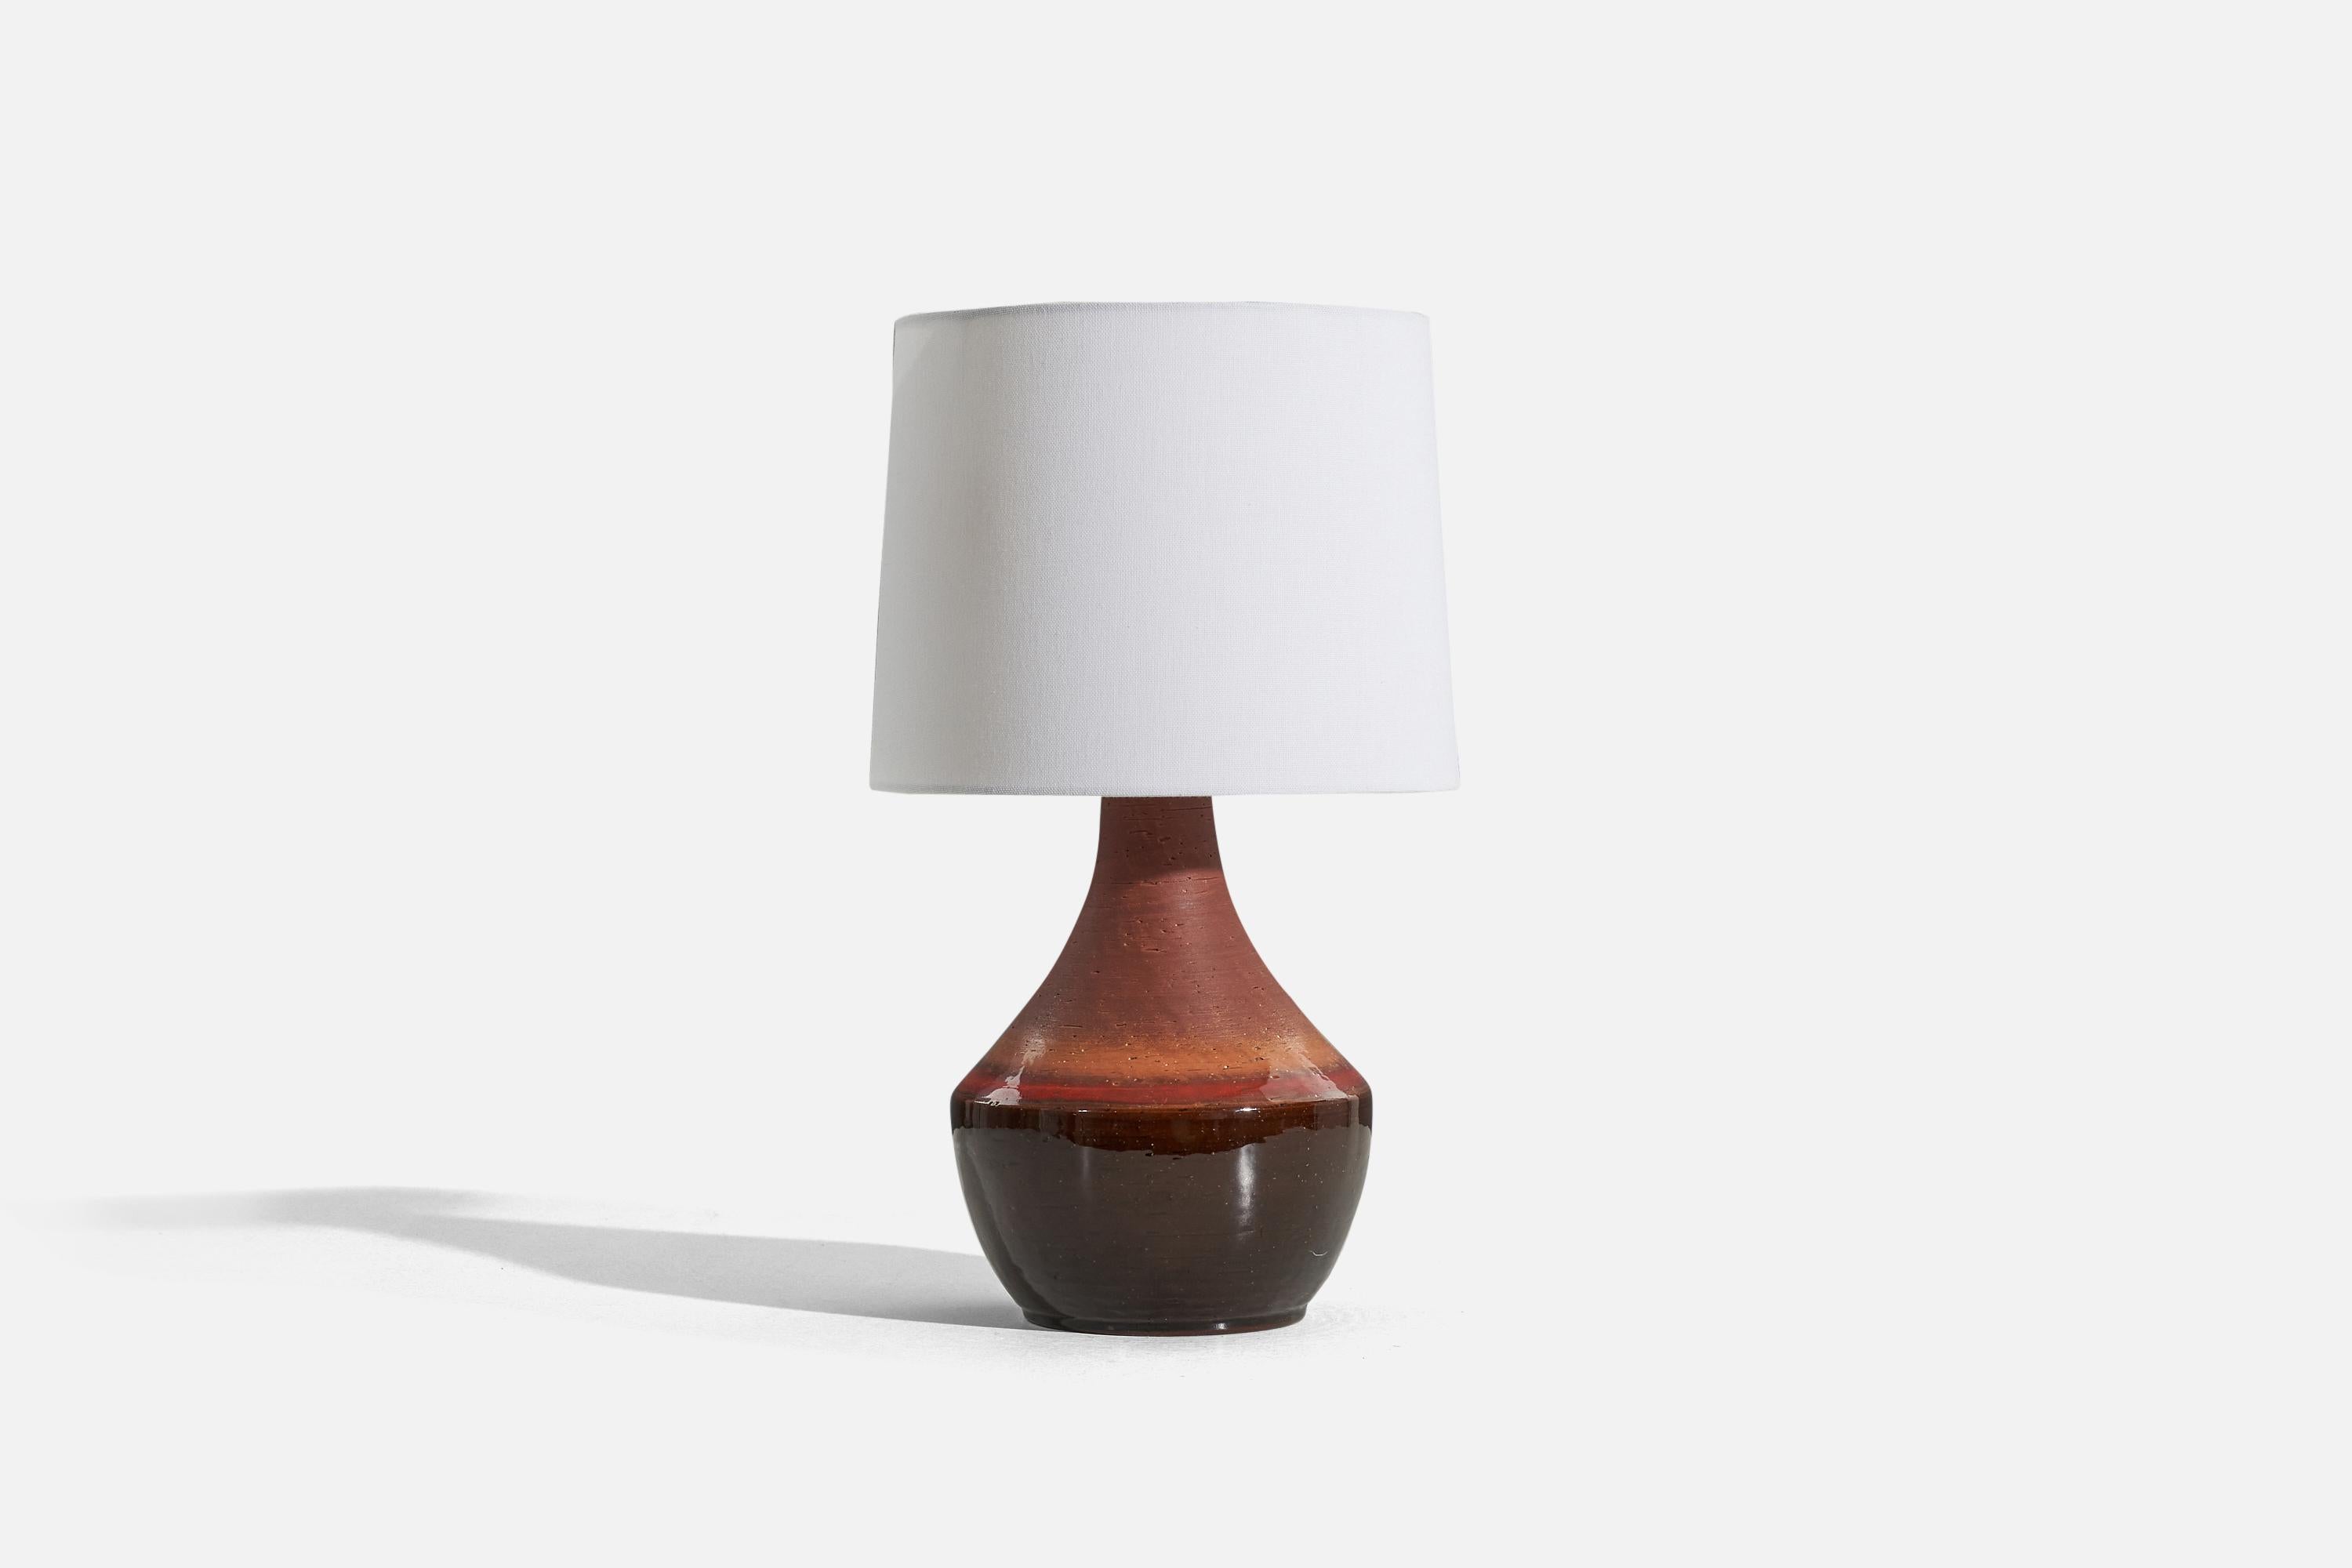 A brown and red, glazed stoneware table lamp designed by Mats Birgersson and produced by his own studio, Töreboda Keramik, c. 1960s. 

Sold without lampshade. 
Dimensions of Lamp (inches) : 13.25 x 7.25 x 7.25 (H x W x D)
Dimensions of Shade